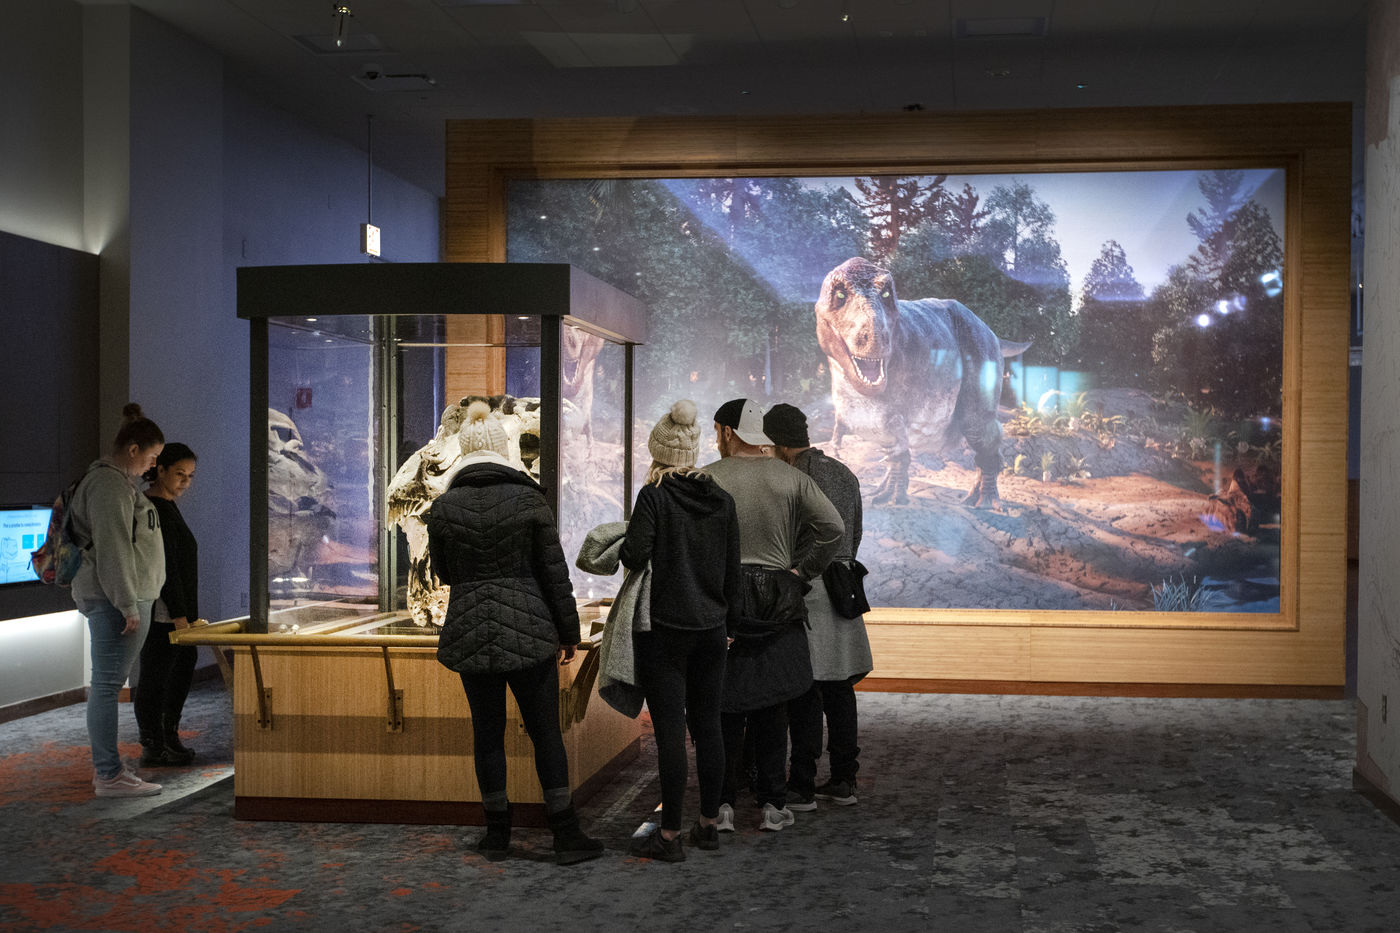 See SUE's fossil skull alongside a mural that recreates what SUE's world might've looked like 67 million years ago.